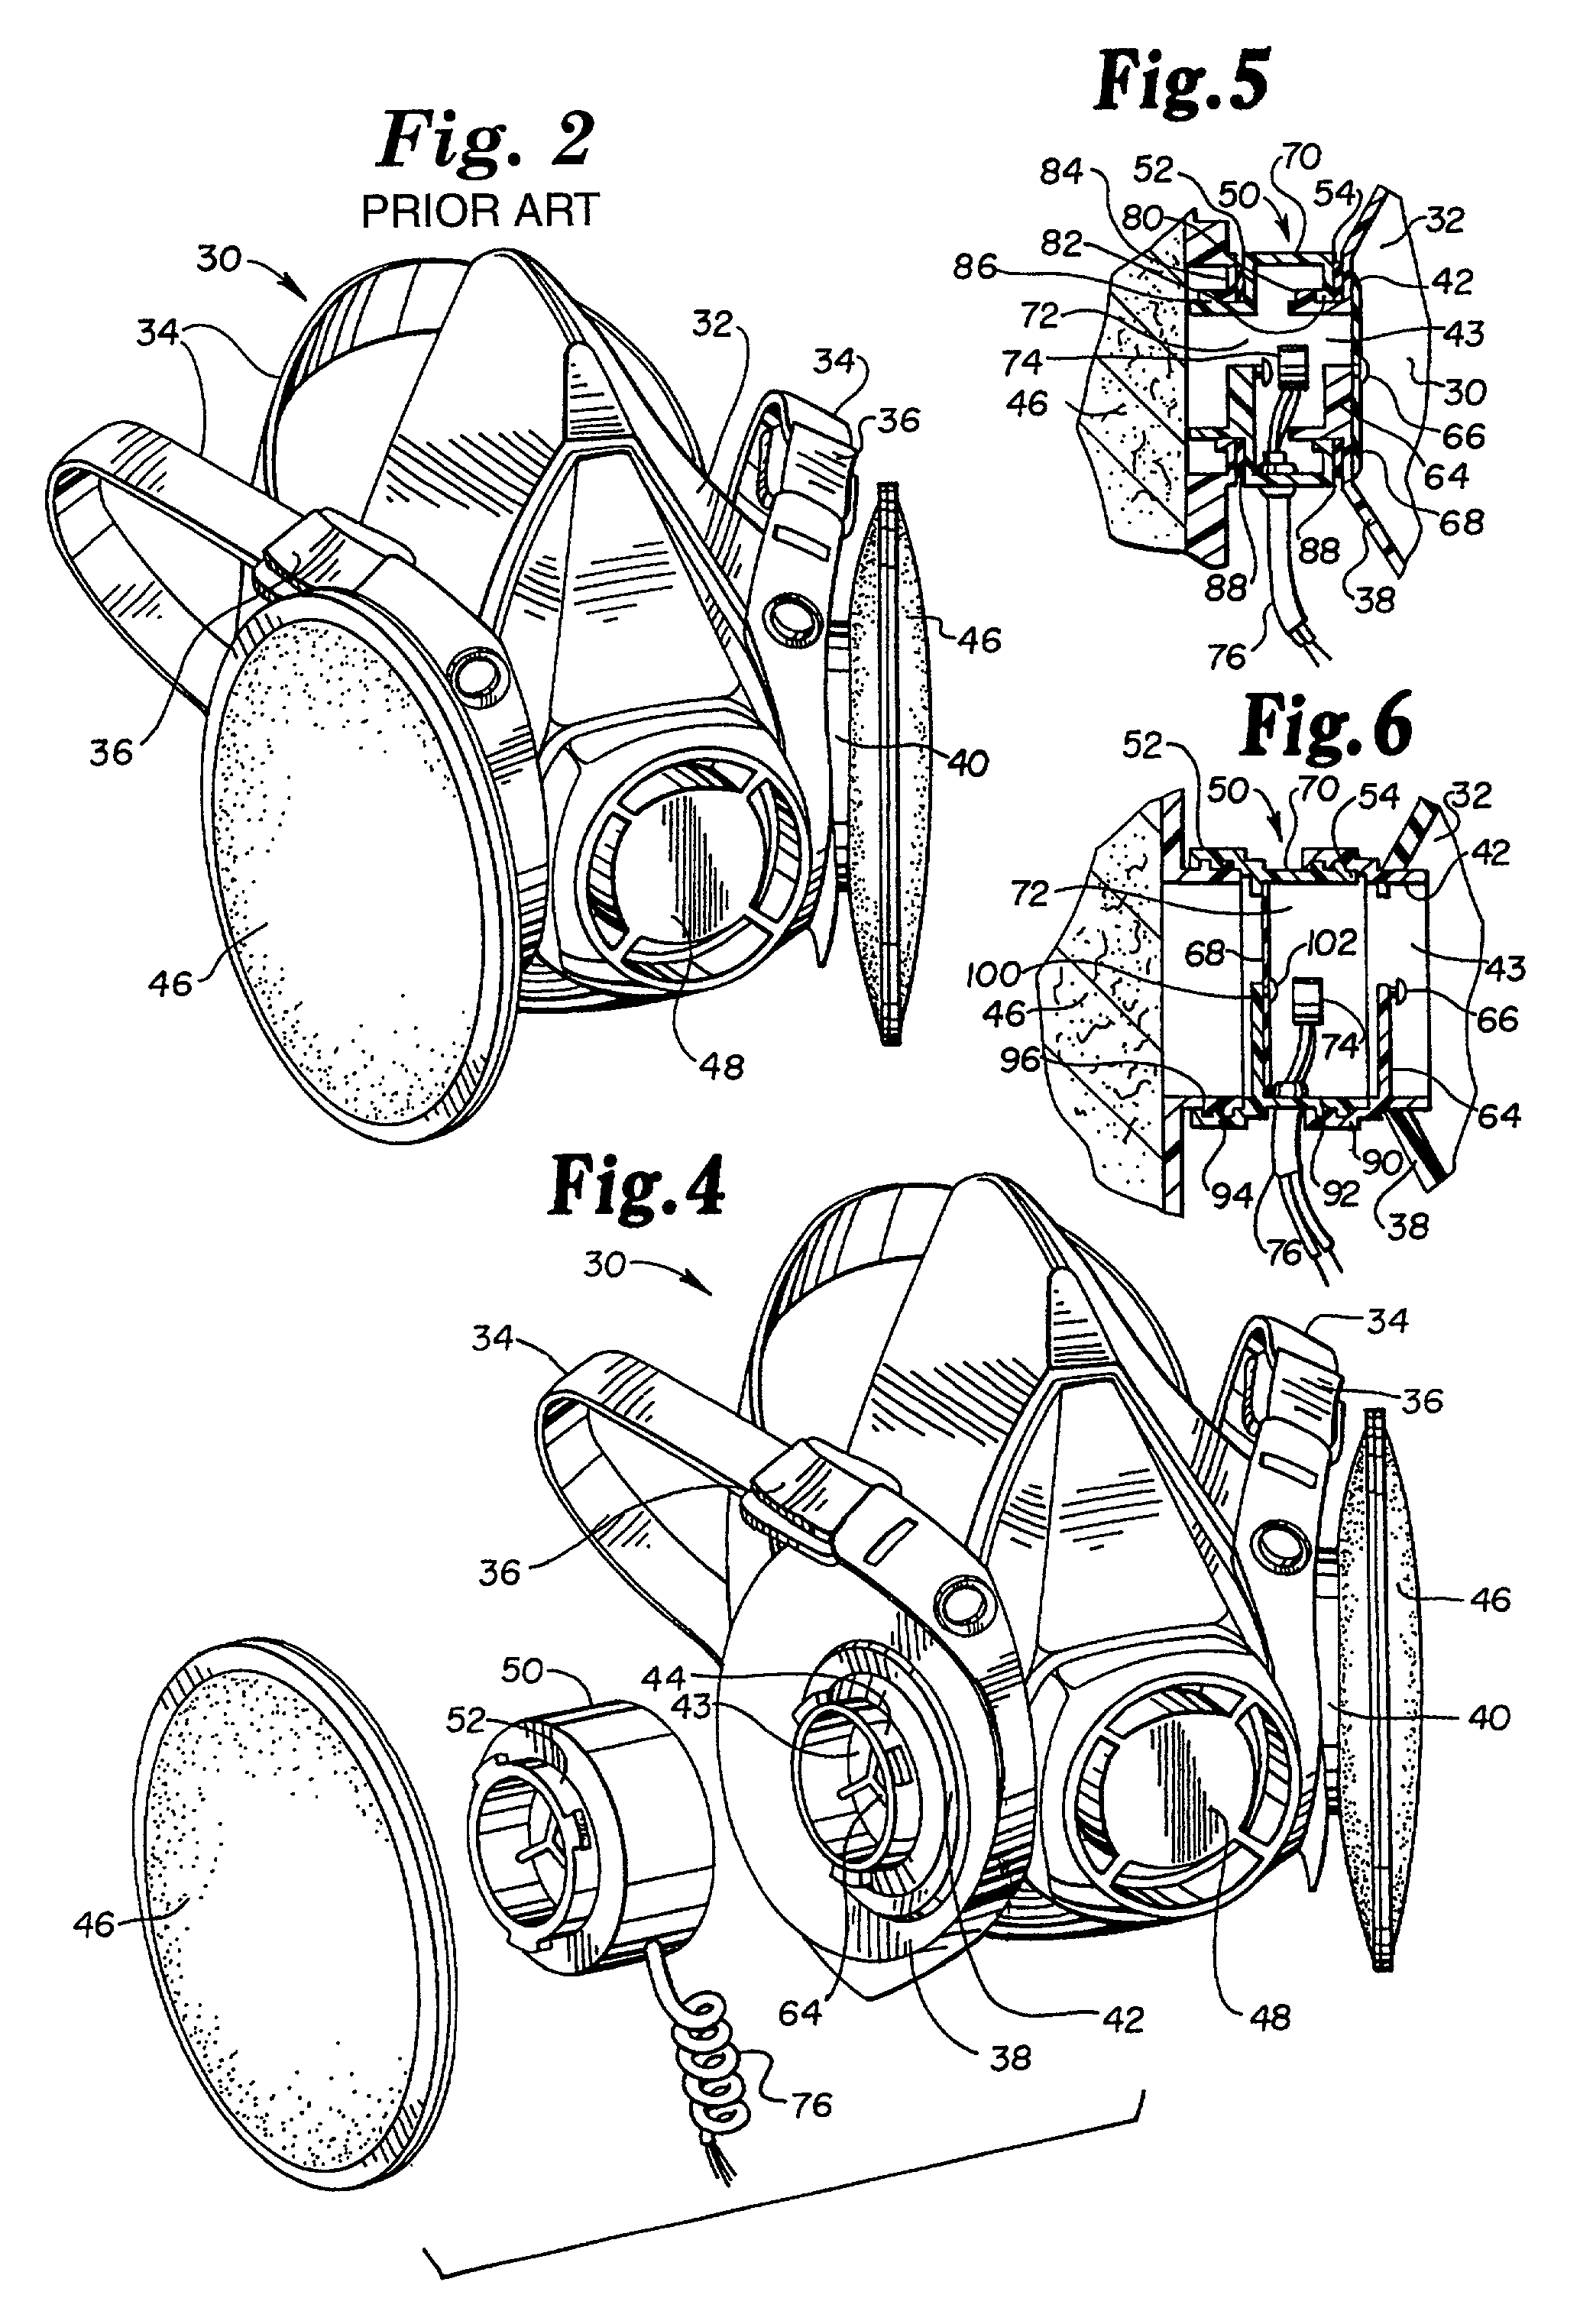 Speech transmission adaptor for use with a respirator mask